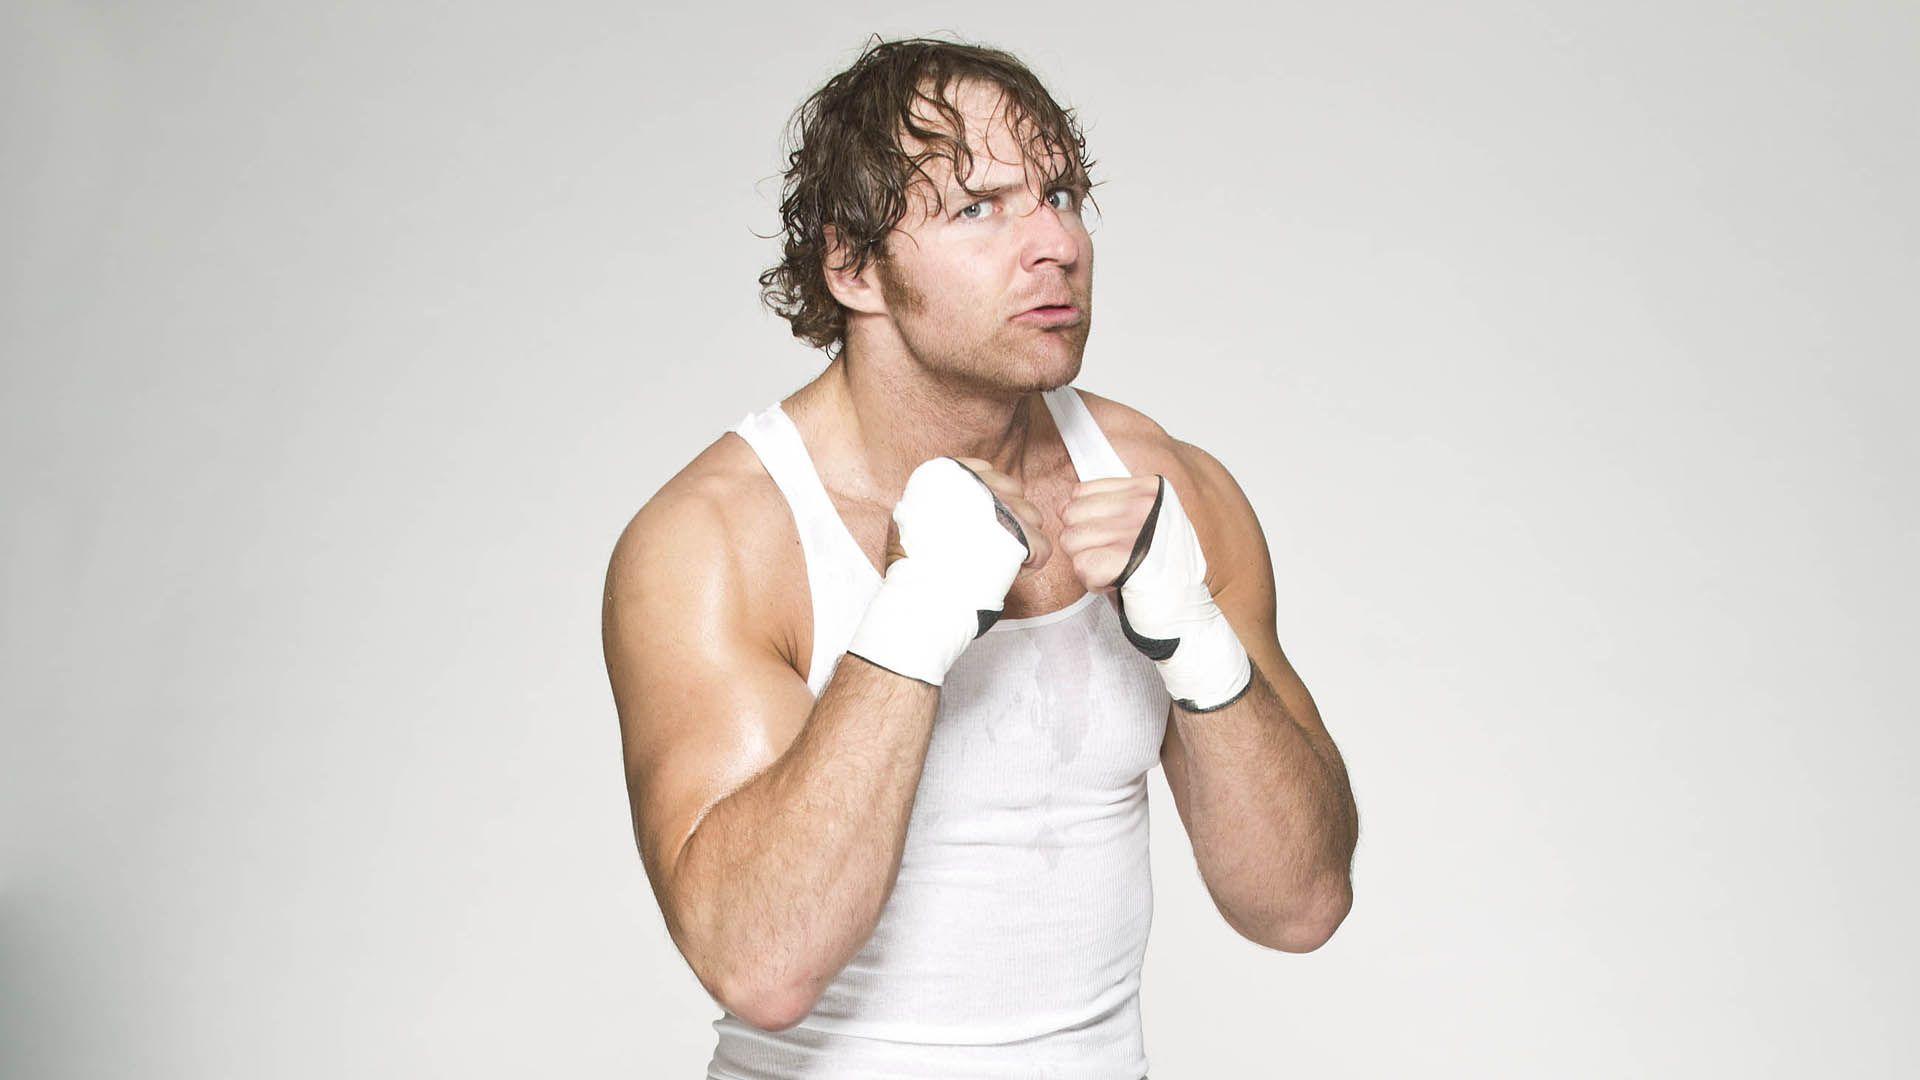 WWE's Dean Ambrose brings the action to big screen in '12 Rounds 3